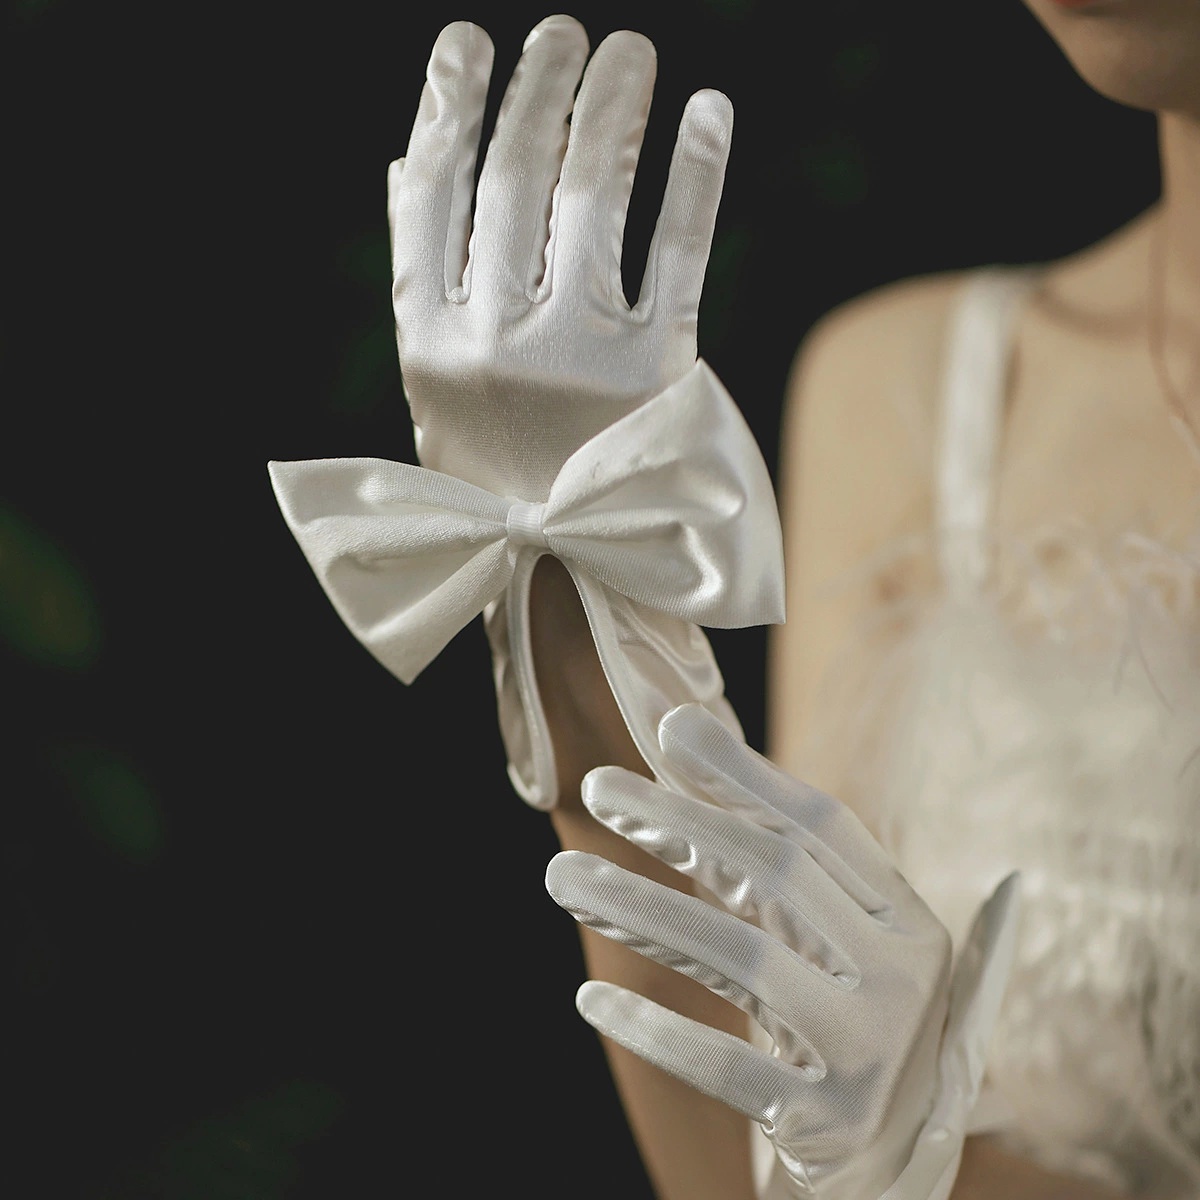 Bride Wedding Gown Lace Gloves White Ceremonial Wedding Gloves Custom Made Dress, Gloves Are